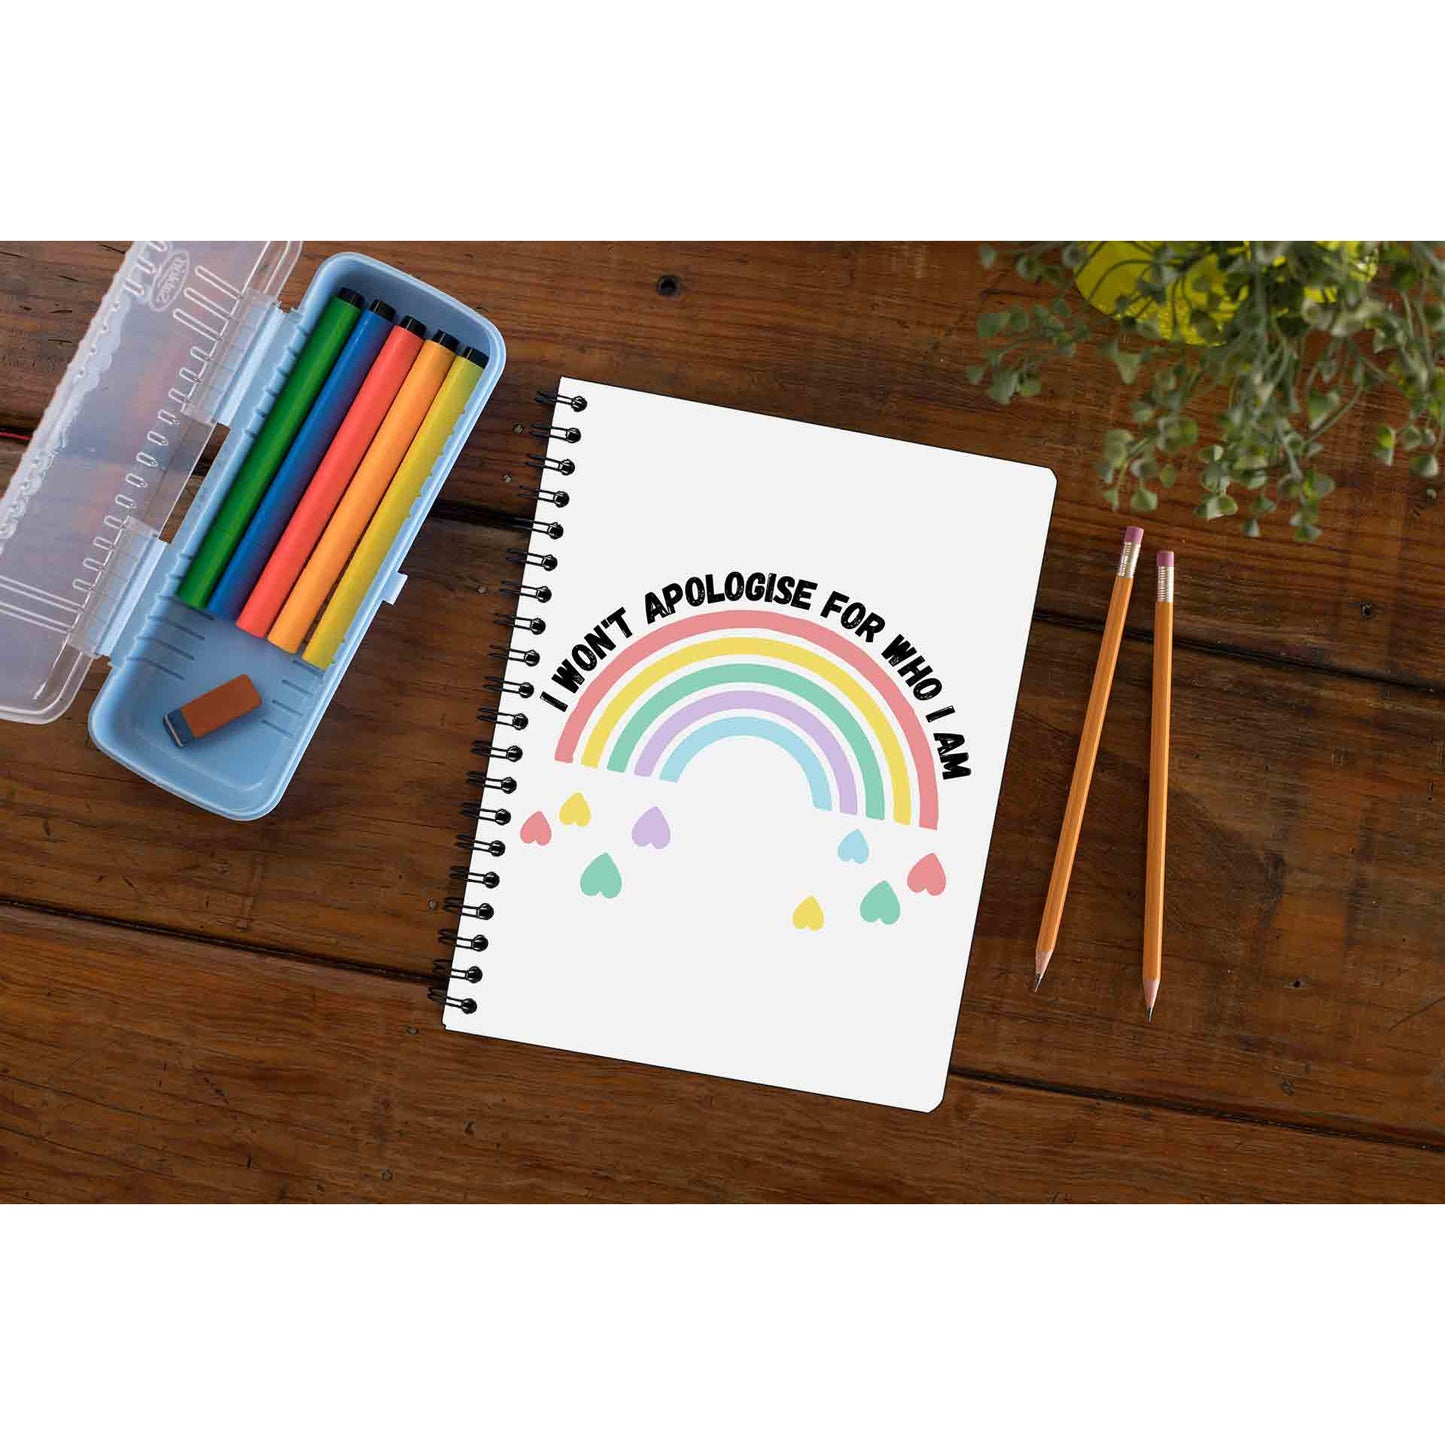 pride i won't apologise for who i am notebook notepad diary buy online india the banyan tee tbt unruled - lgbtqia+